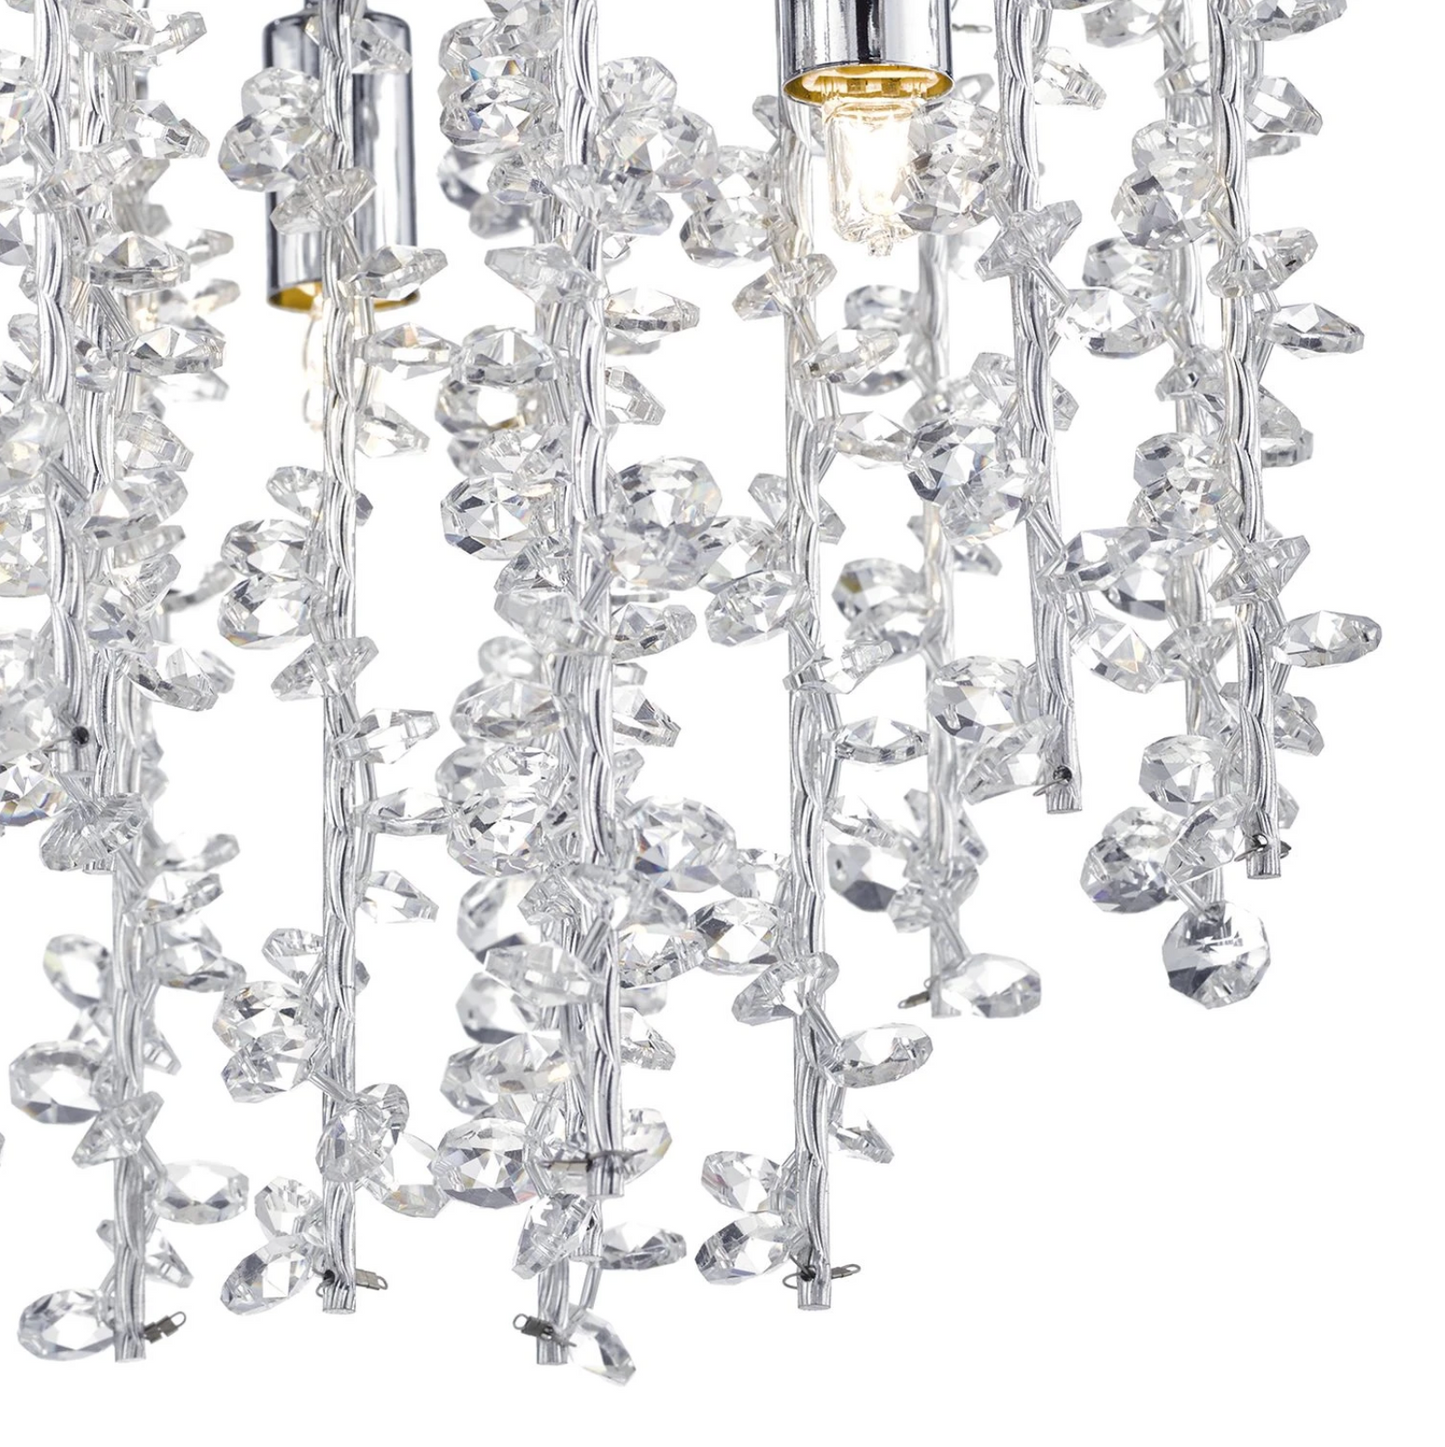 Oakleigh Polished Chrome & Crystal 3 Lamp Flush Ceiling Light - ID 5546 limited stock